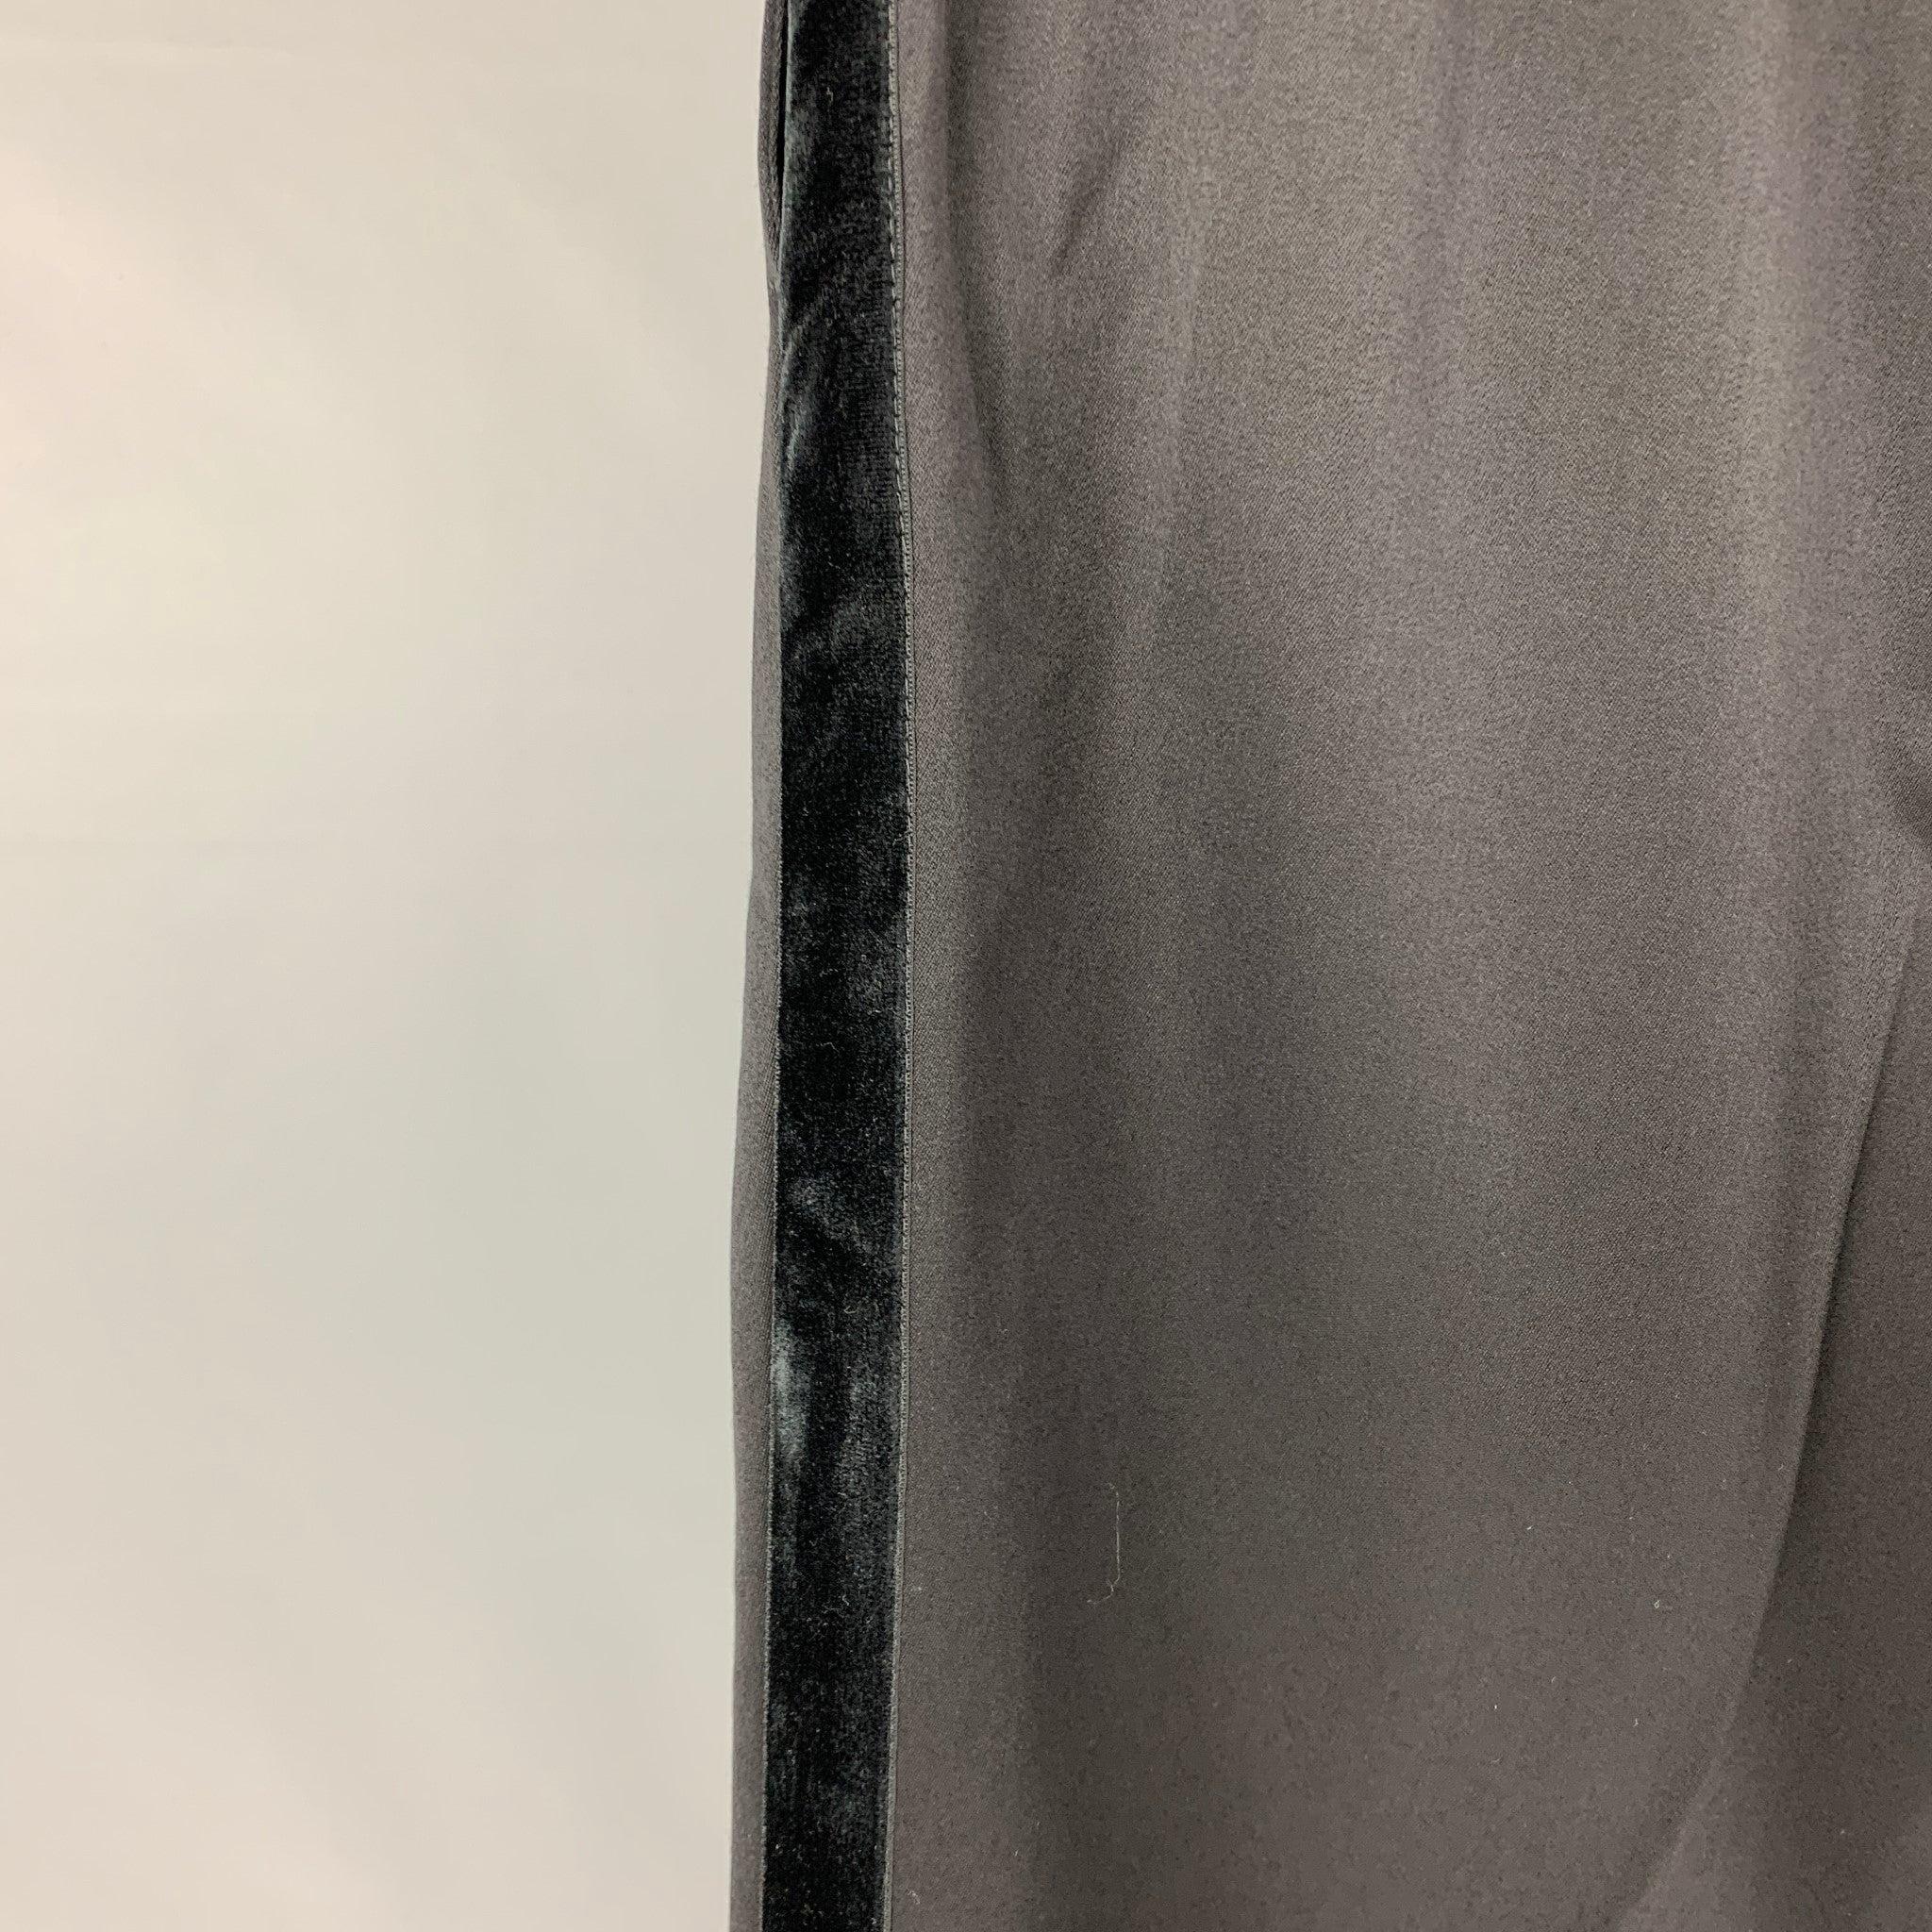 PAUL SMITH dress pants comes in a black wool featuring a flat front, cuffed leg, velvet tuxedo stripe, and a zip fly closure. Made in Italy.
Very Good
Pre-Owned Condition. 

Marked:   36 

Measurements: 
  Waist: 36 inches  Rise: 12 inches  Inseam: